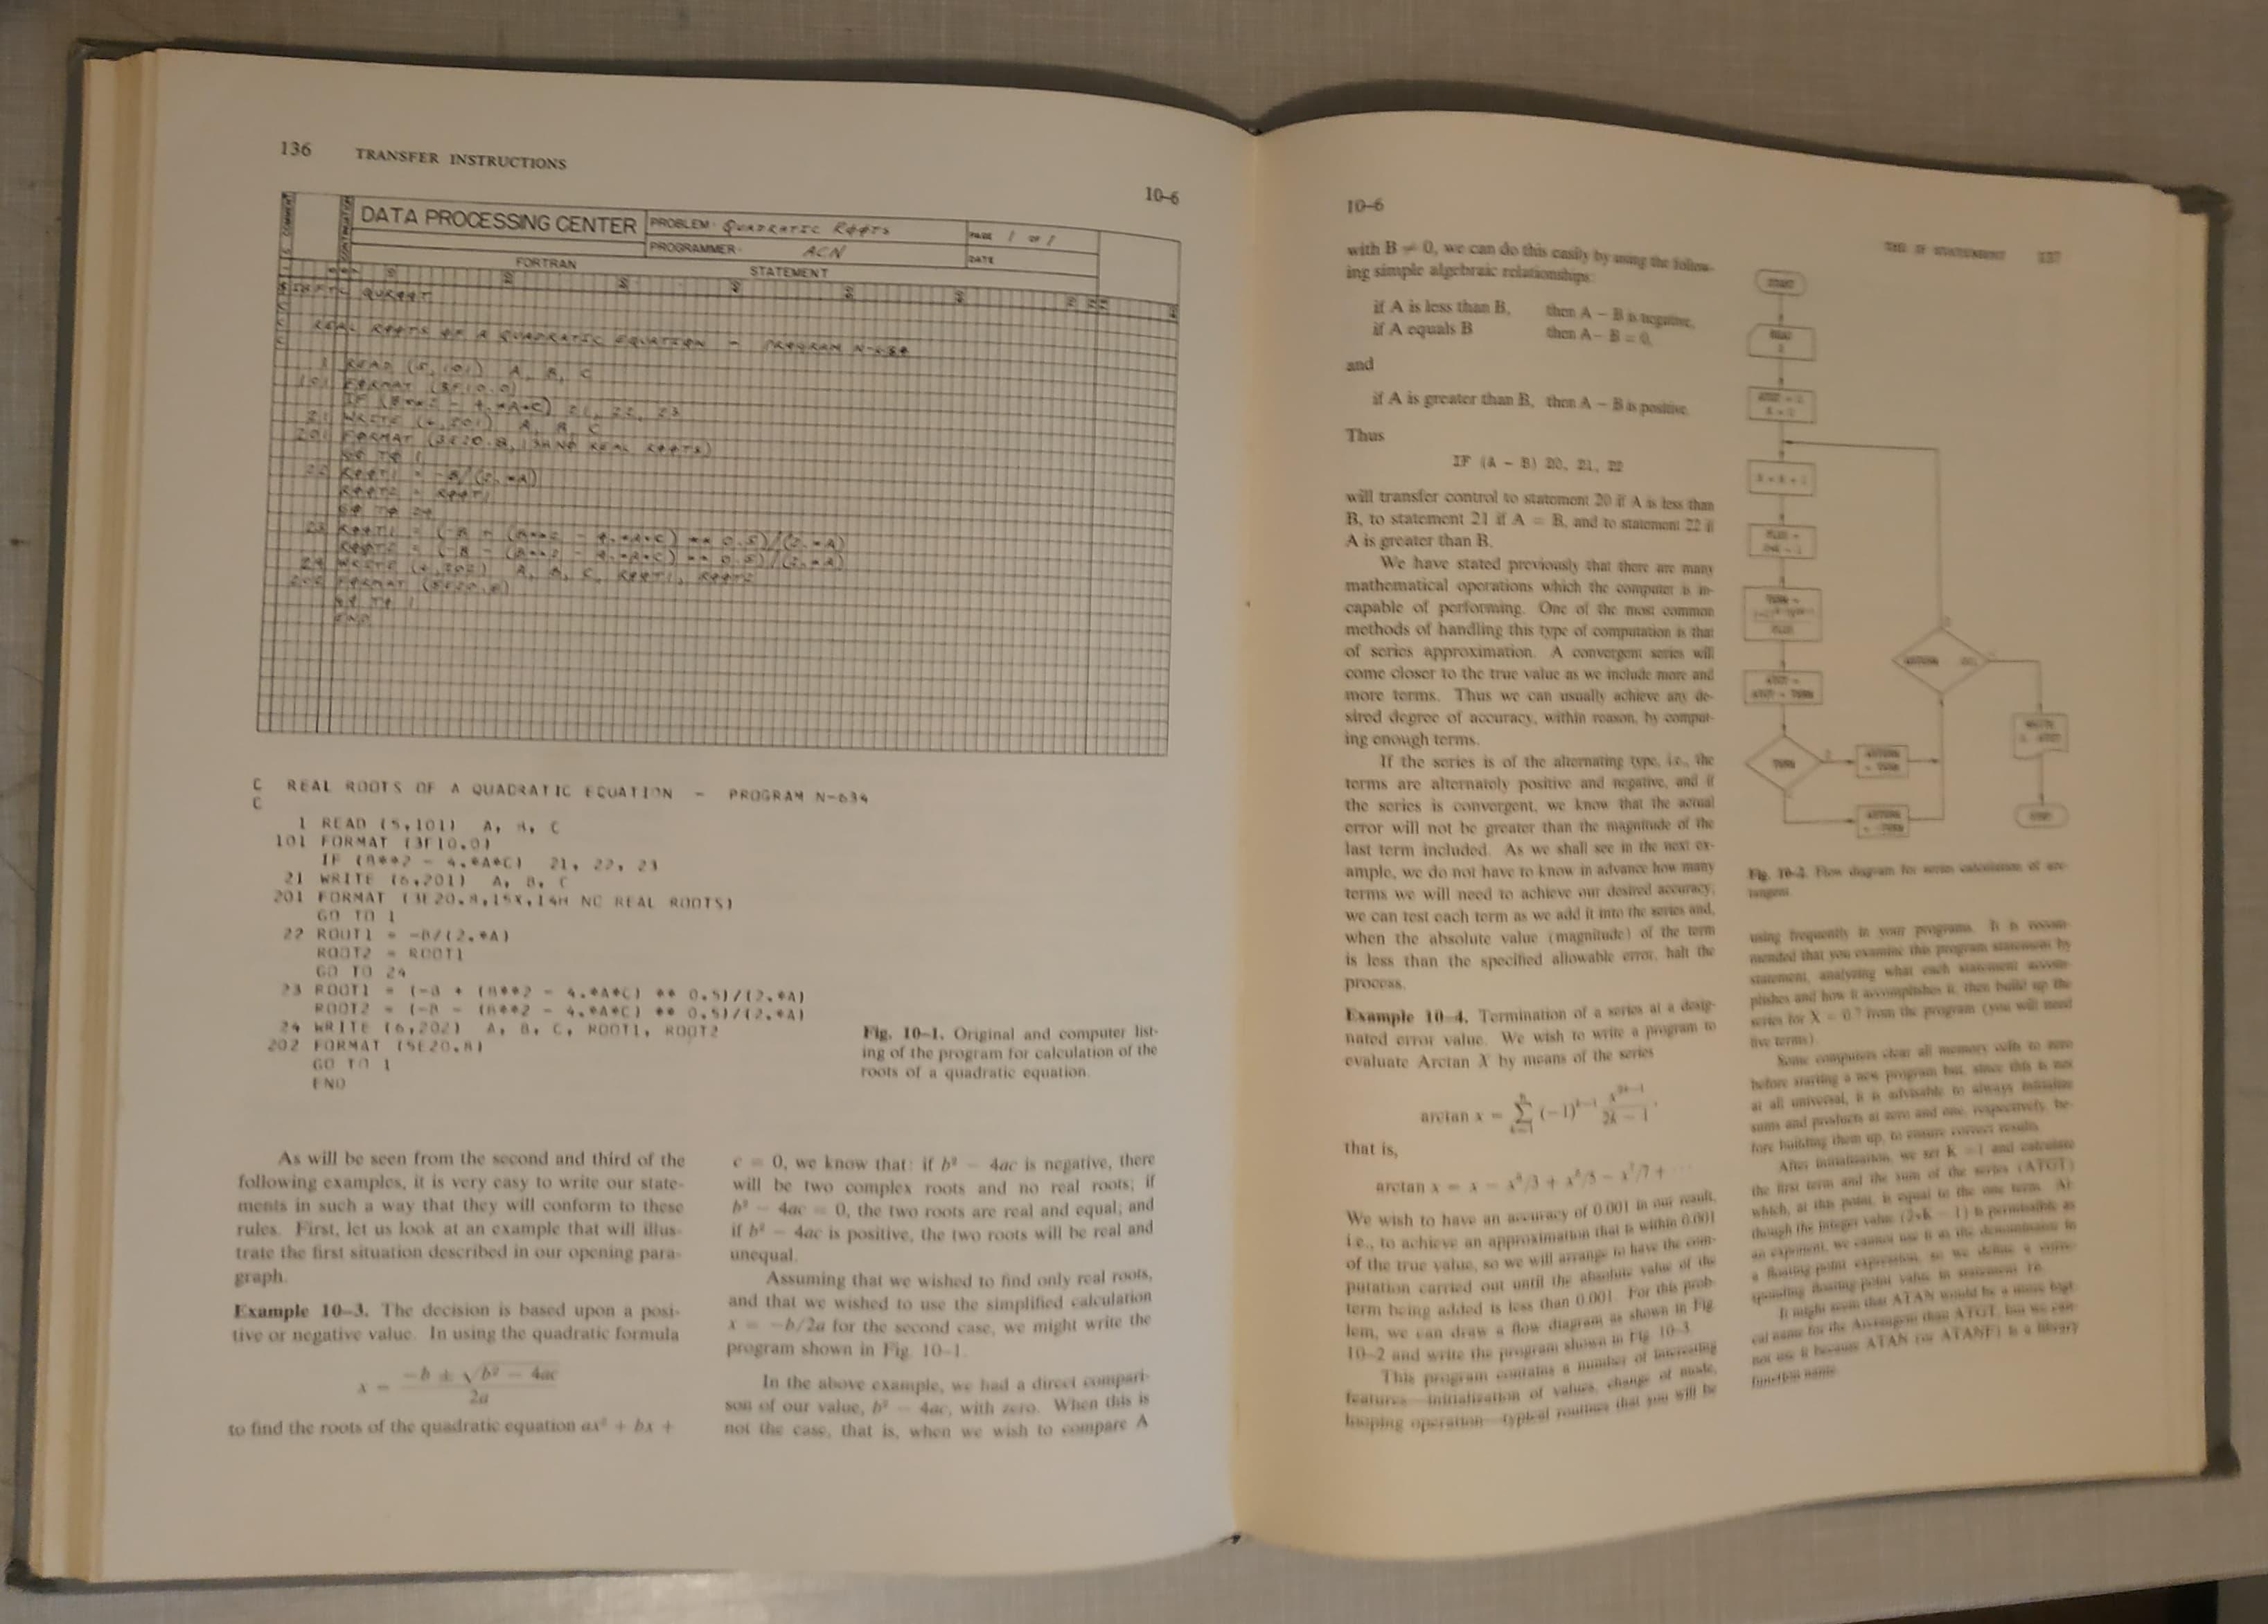 Pages of a book, displaying text, mathematics, FORTRAN code, and a flow chart